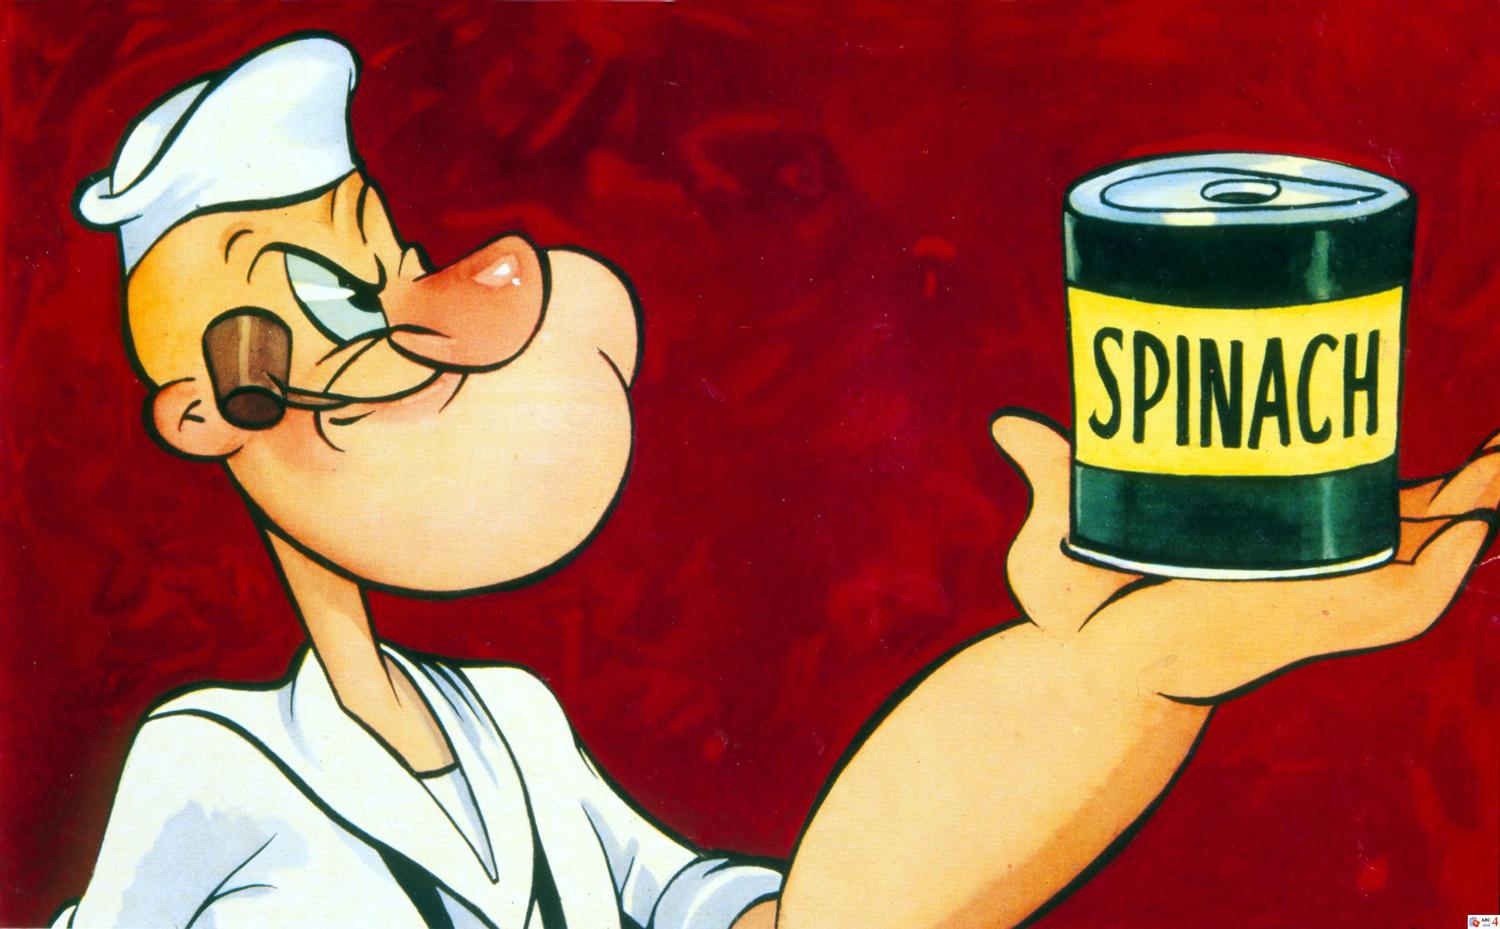 The Polish Roots of Popeye | Article | Culture.pl